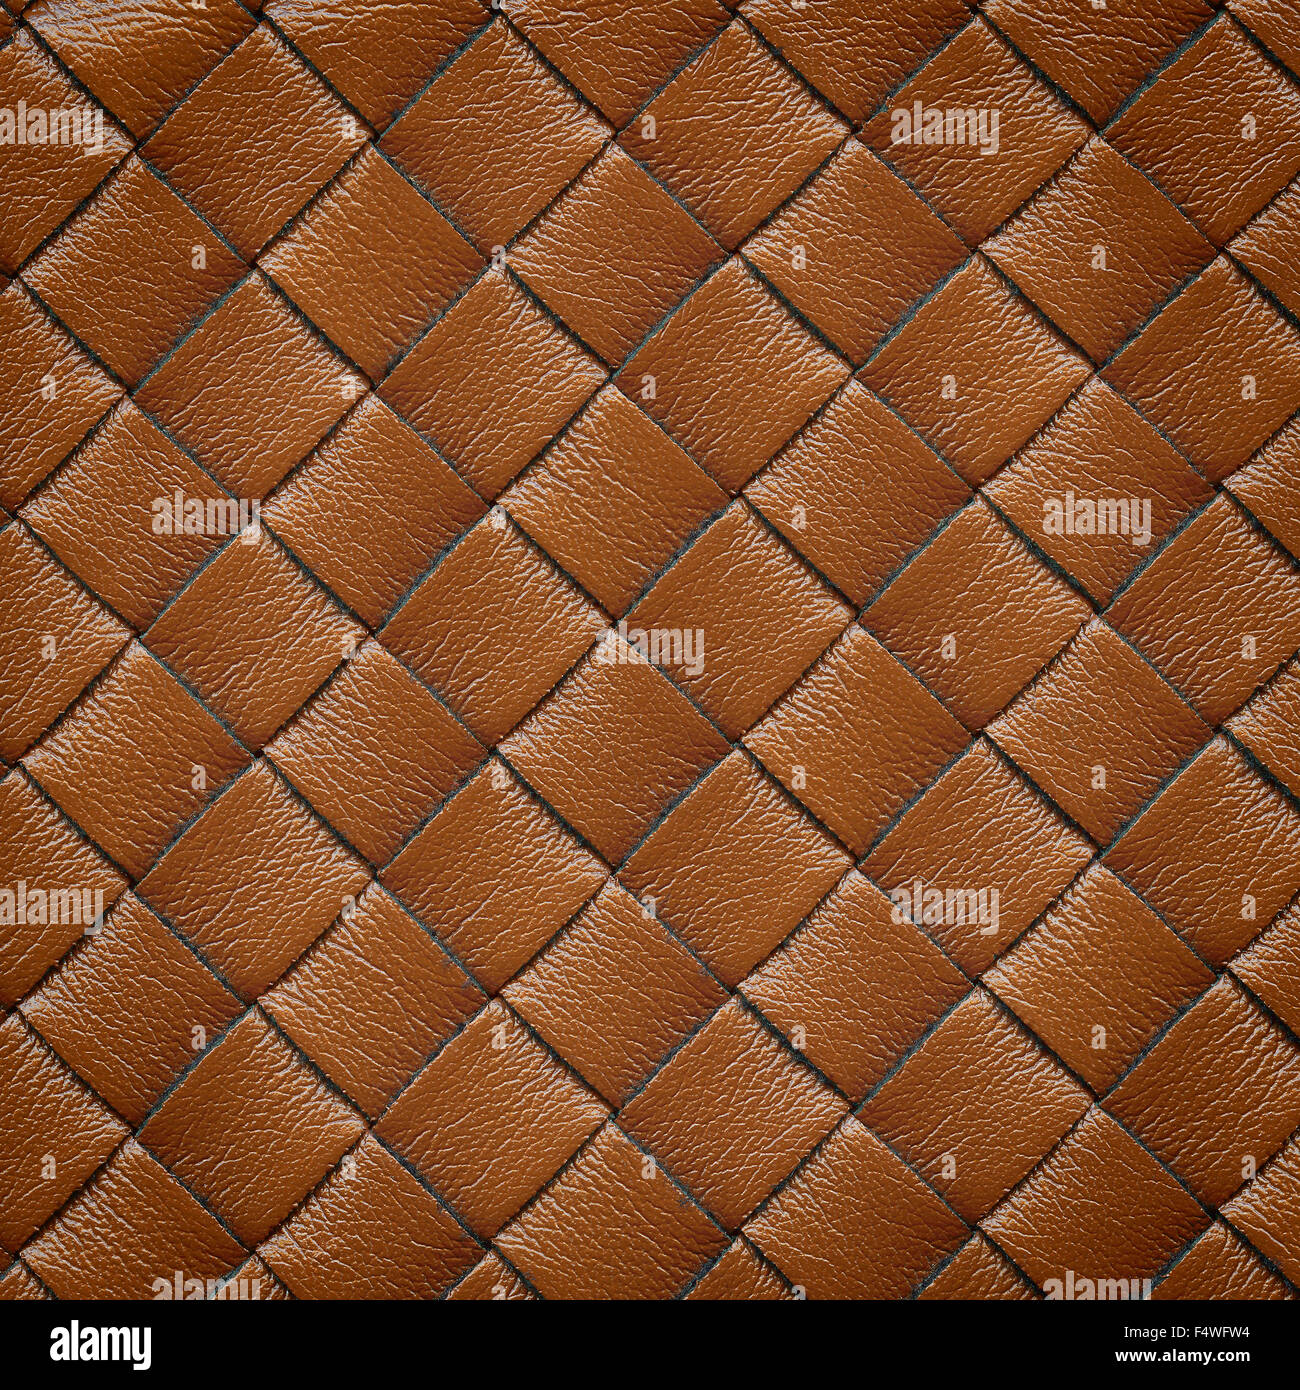 Brown leather woven texture background Stock Photo